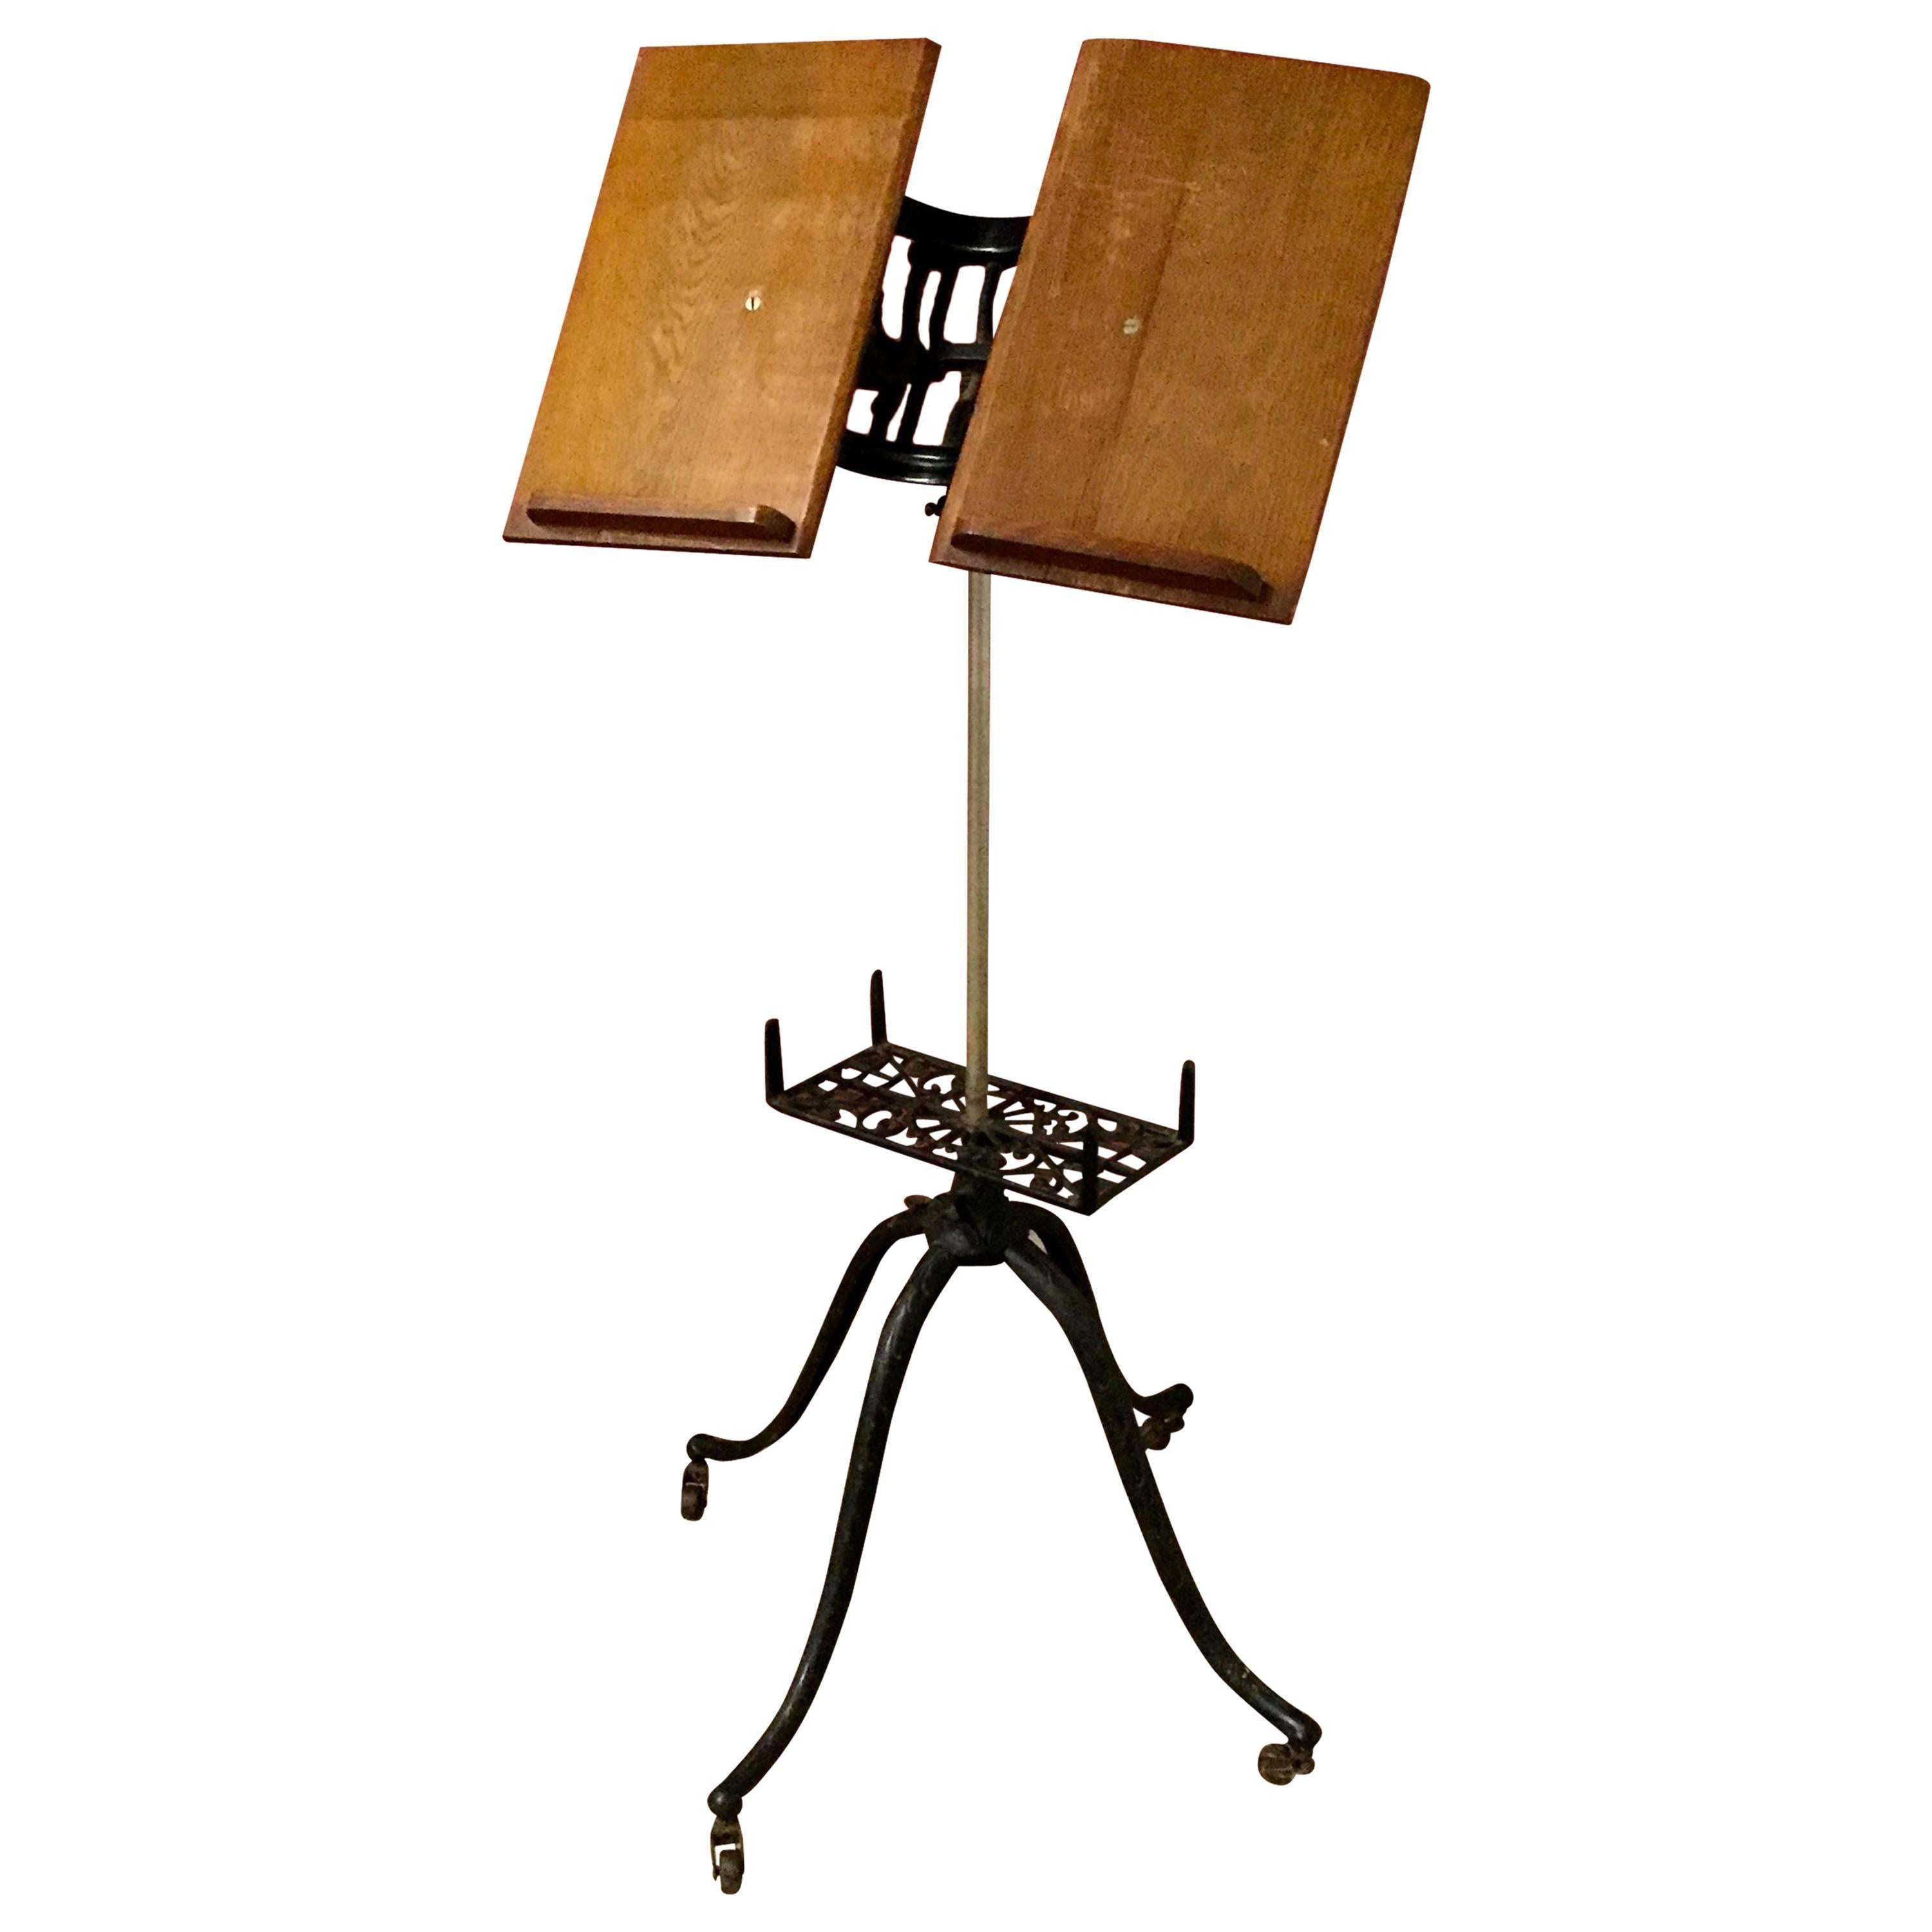 Early Iron and Oak Adjustable Book Stand